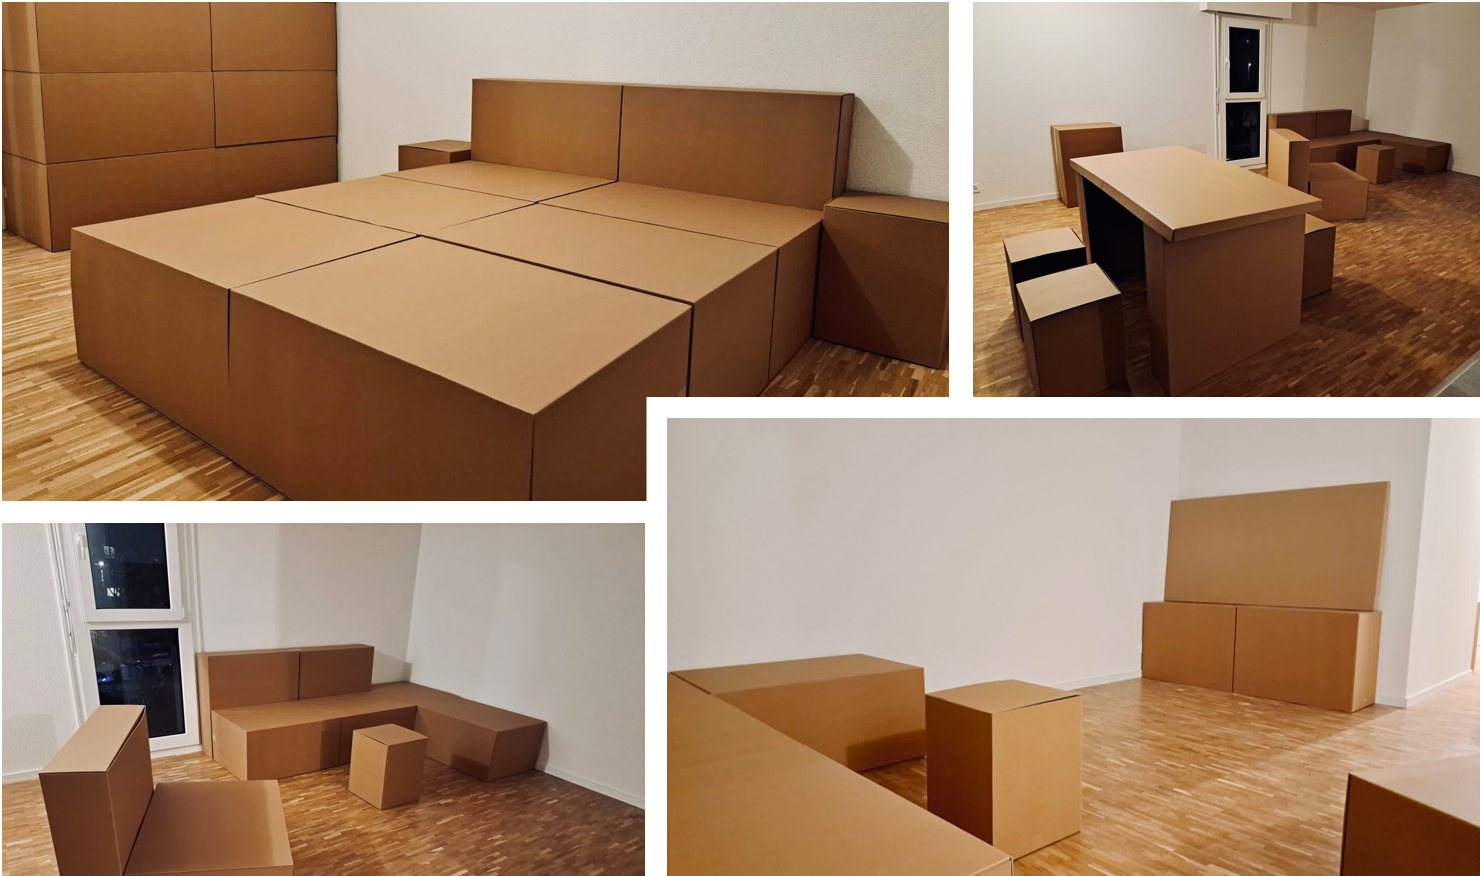 Read more about the article “Home staging” with cardboard boxes